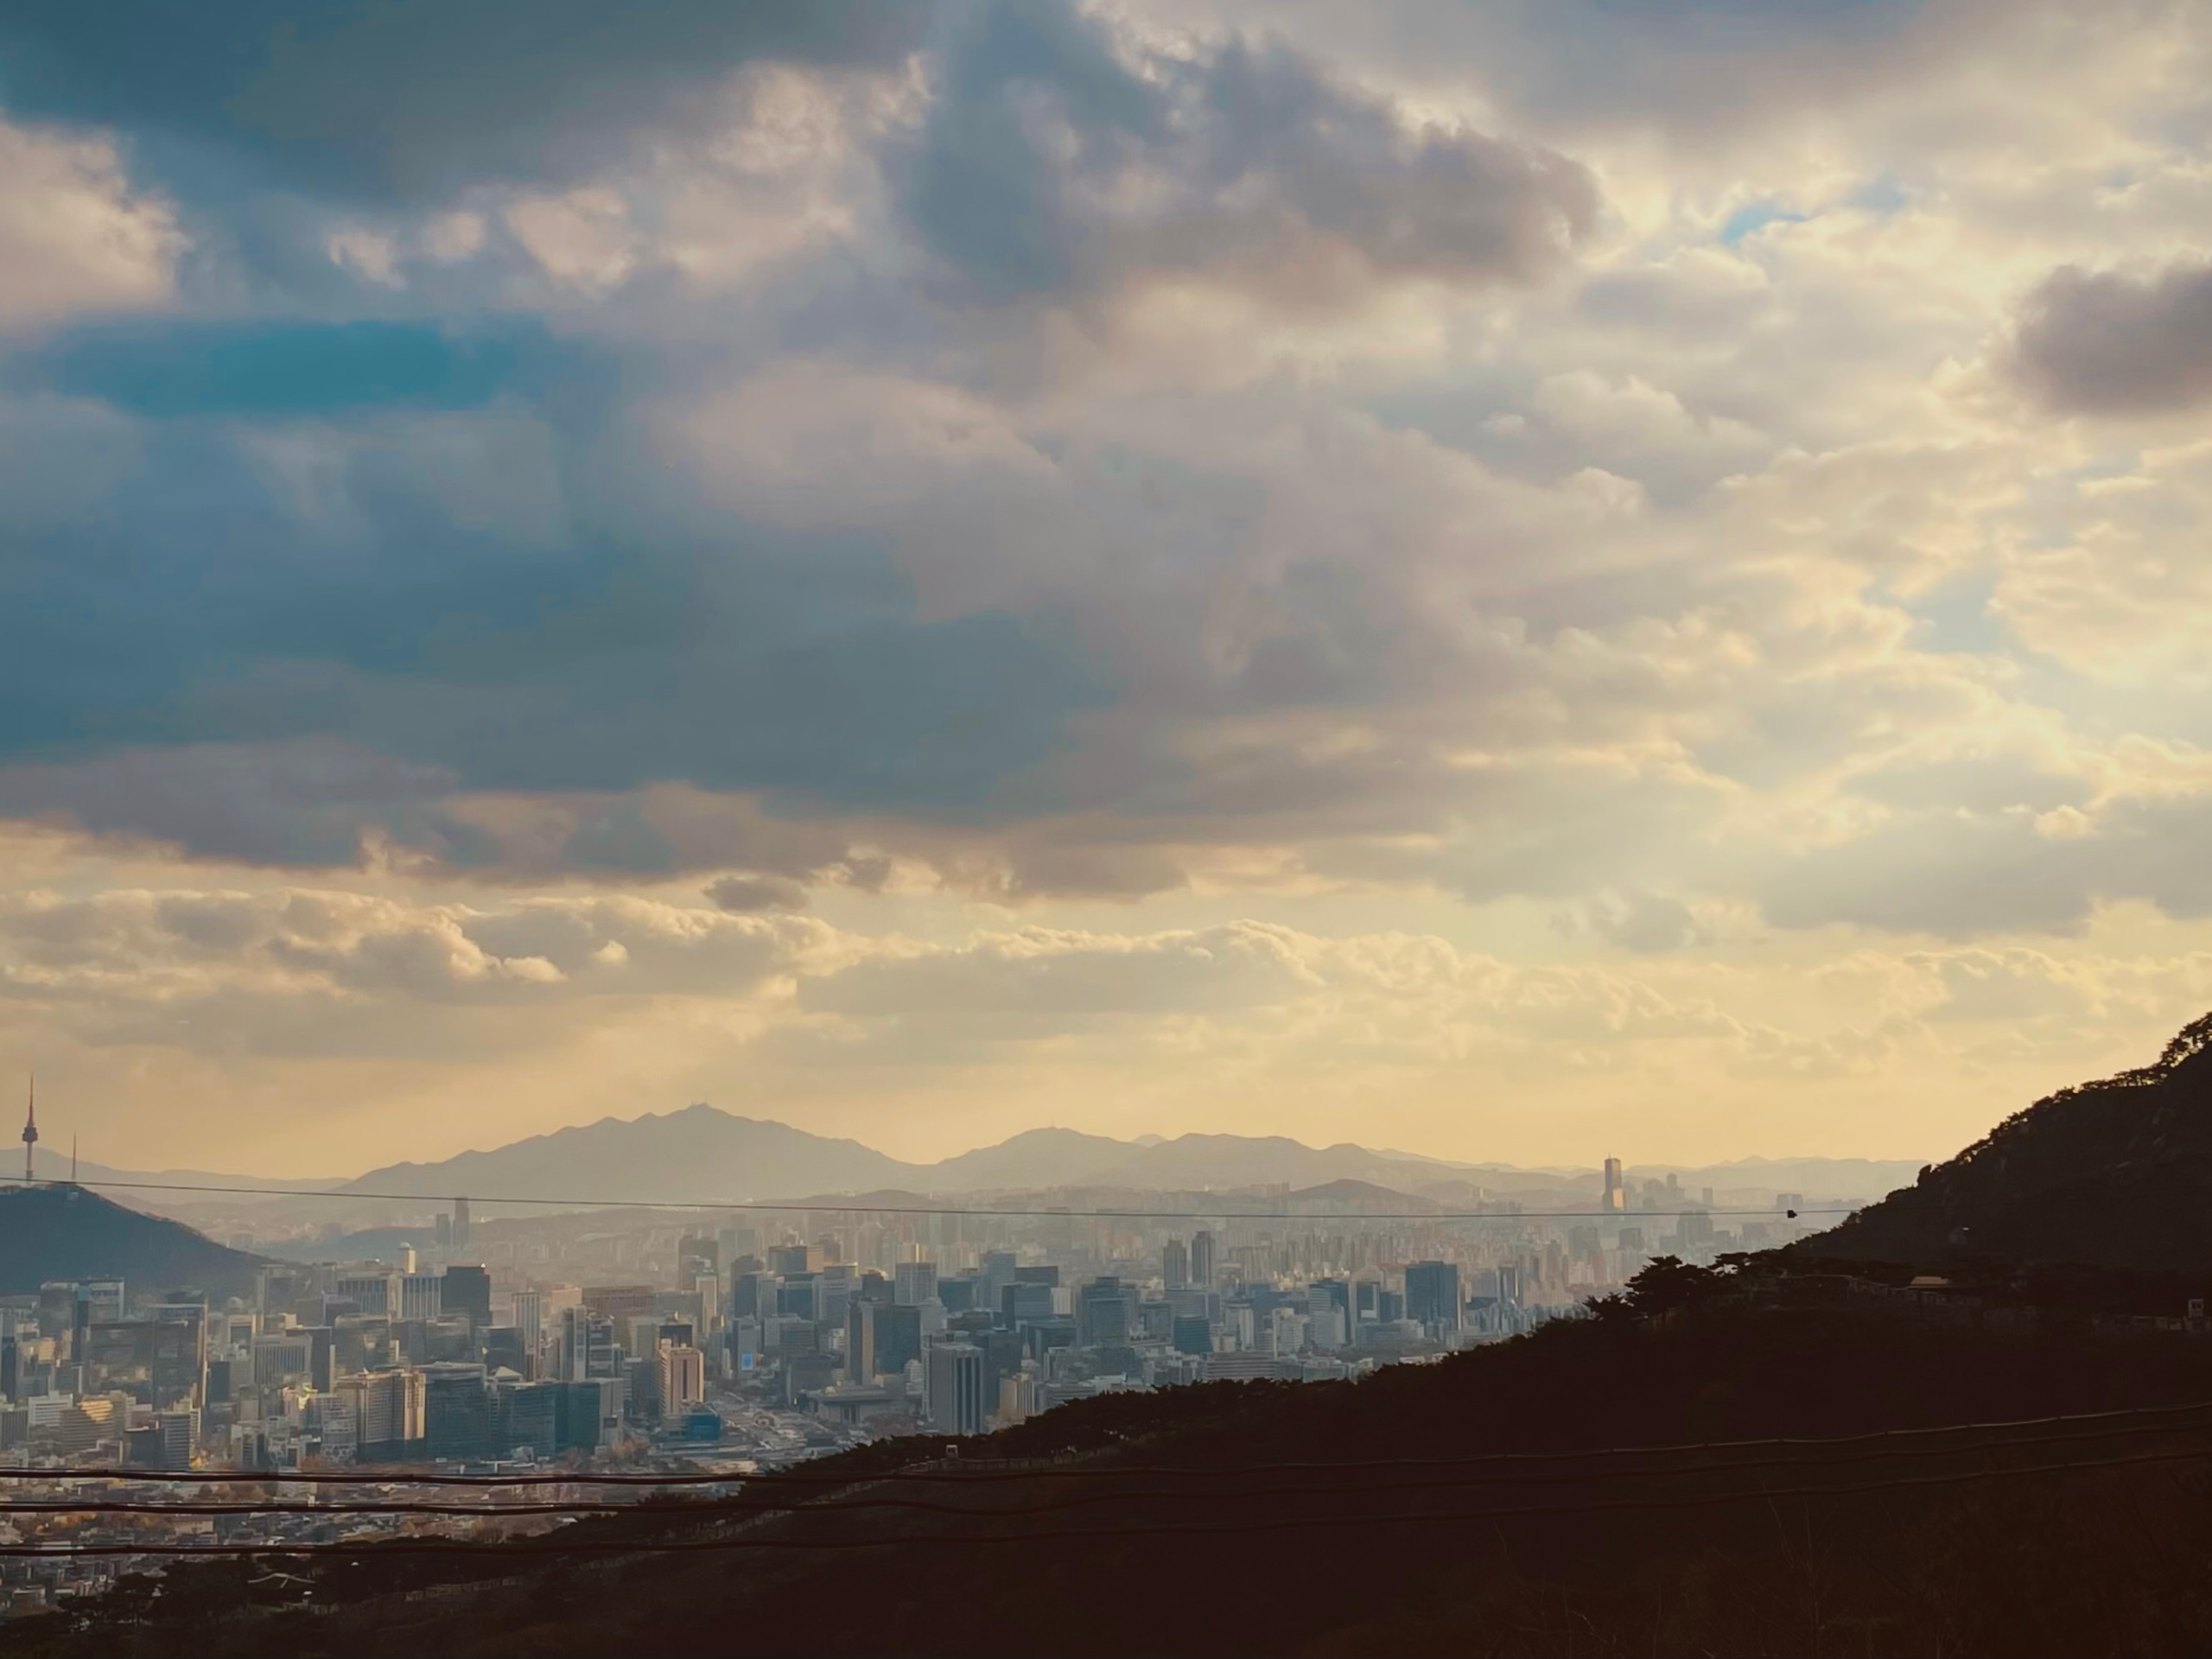 Image at dusk from the perspective of a hill overlooking Seoul.